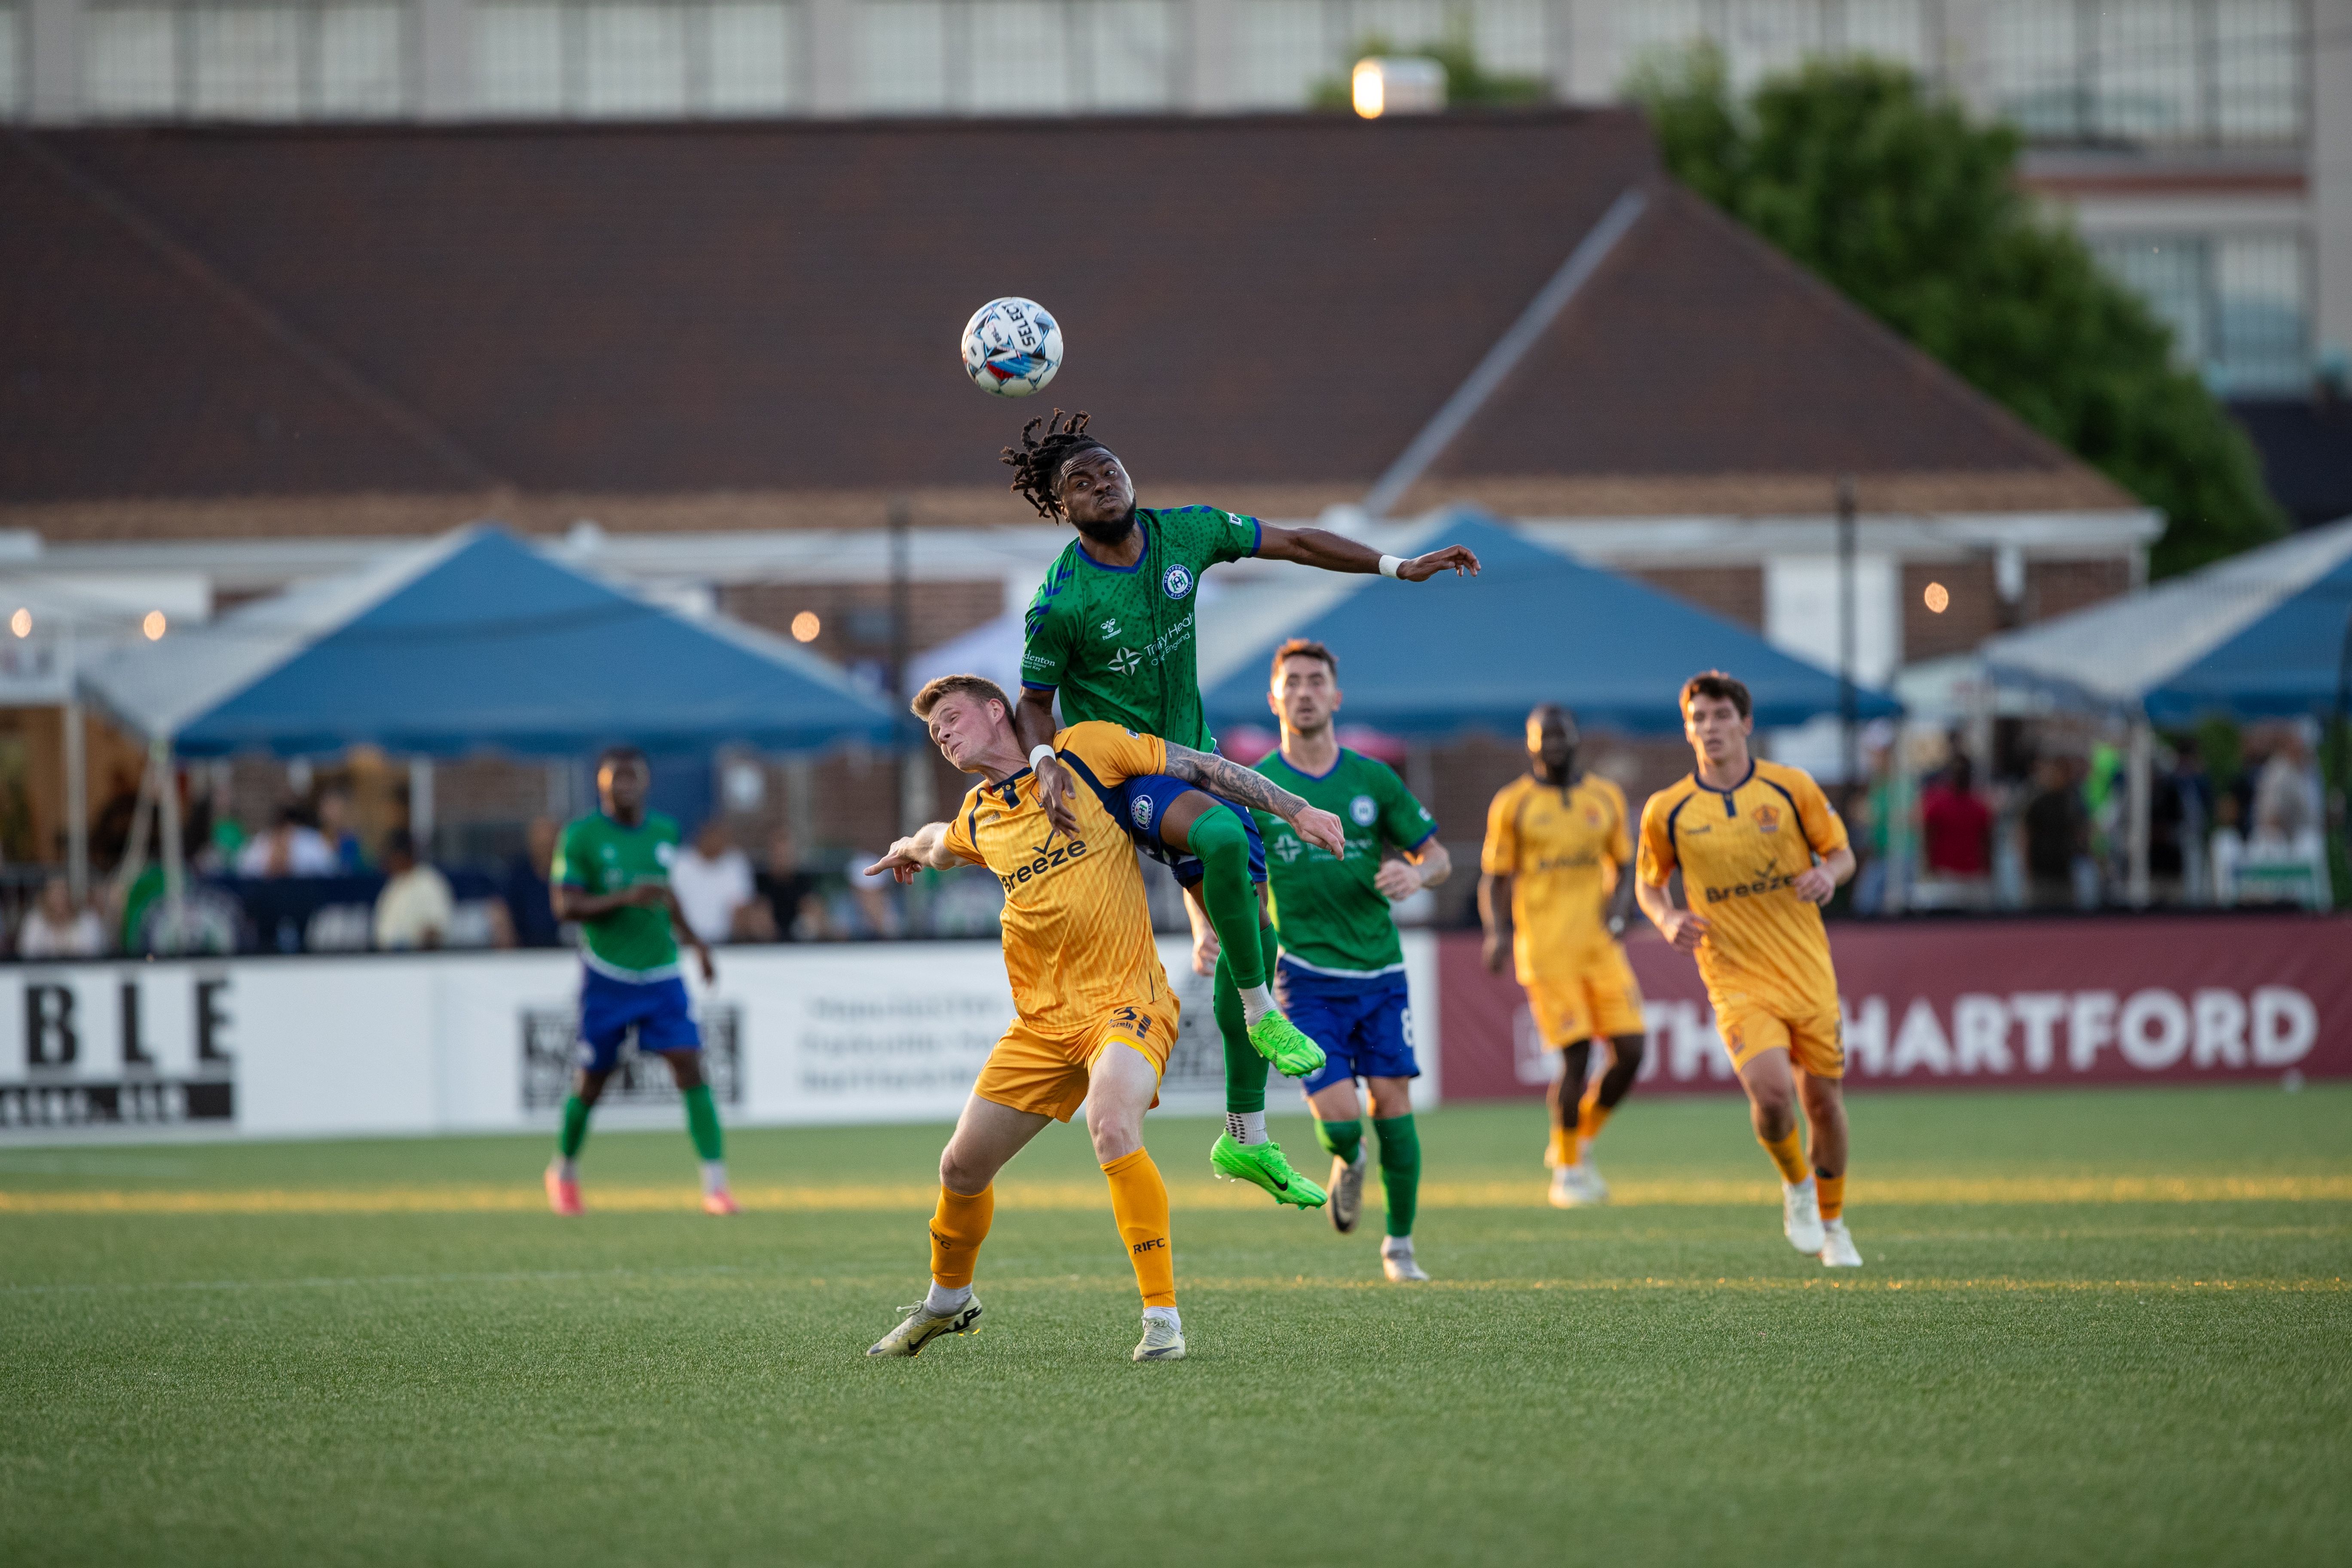 Hartford Tie Rhode Island 1-1 in First Draw of the Season  featured image